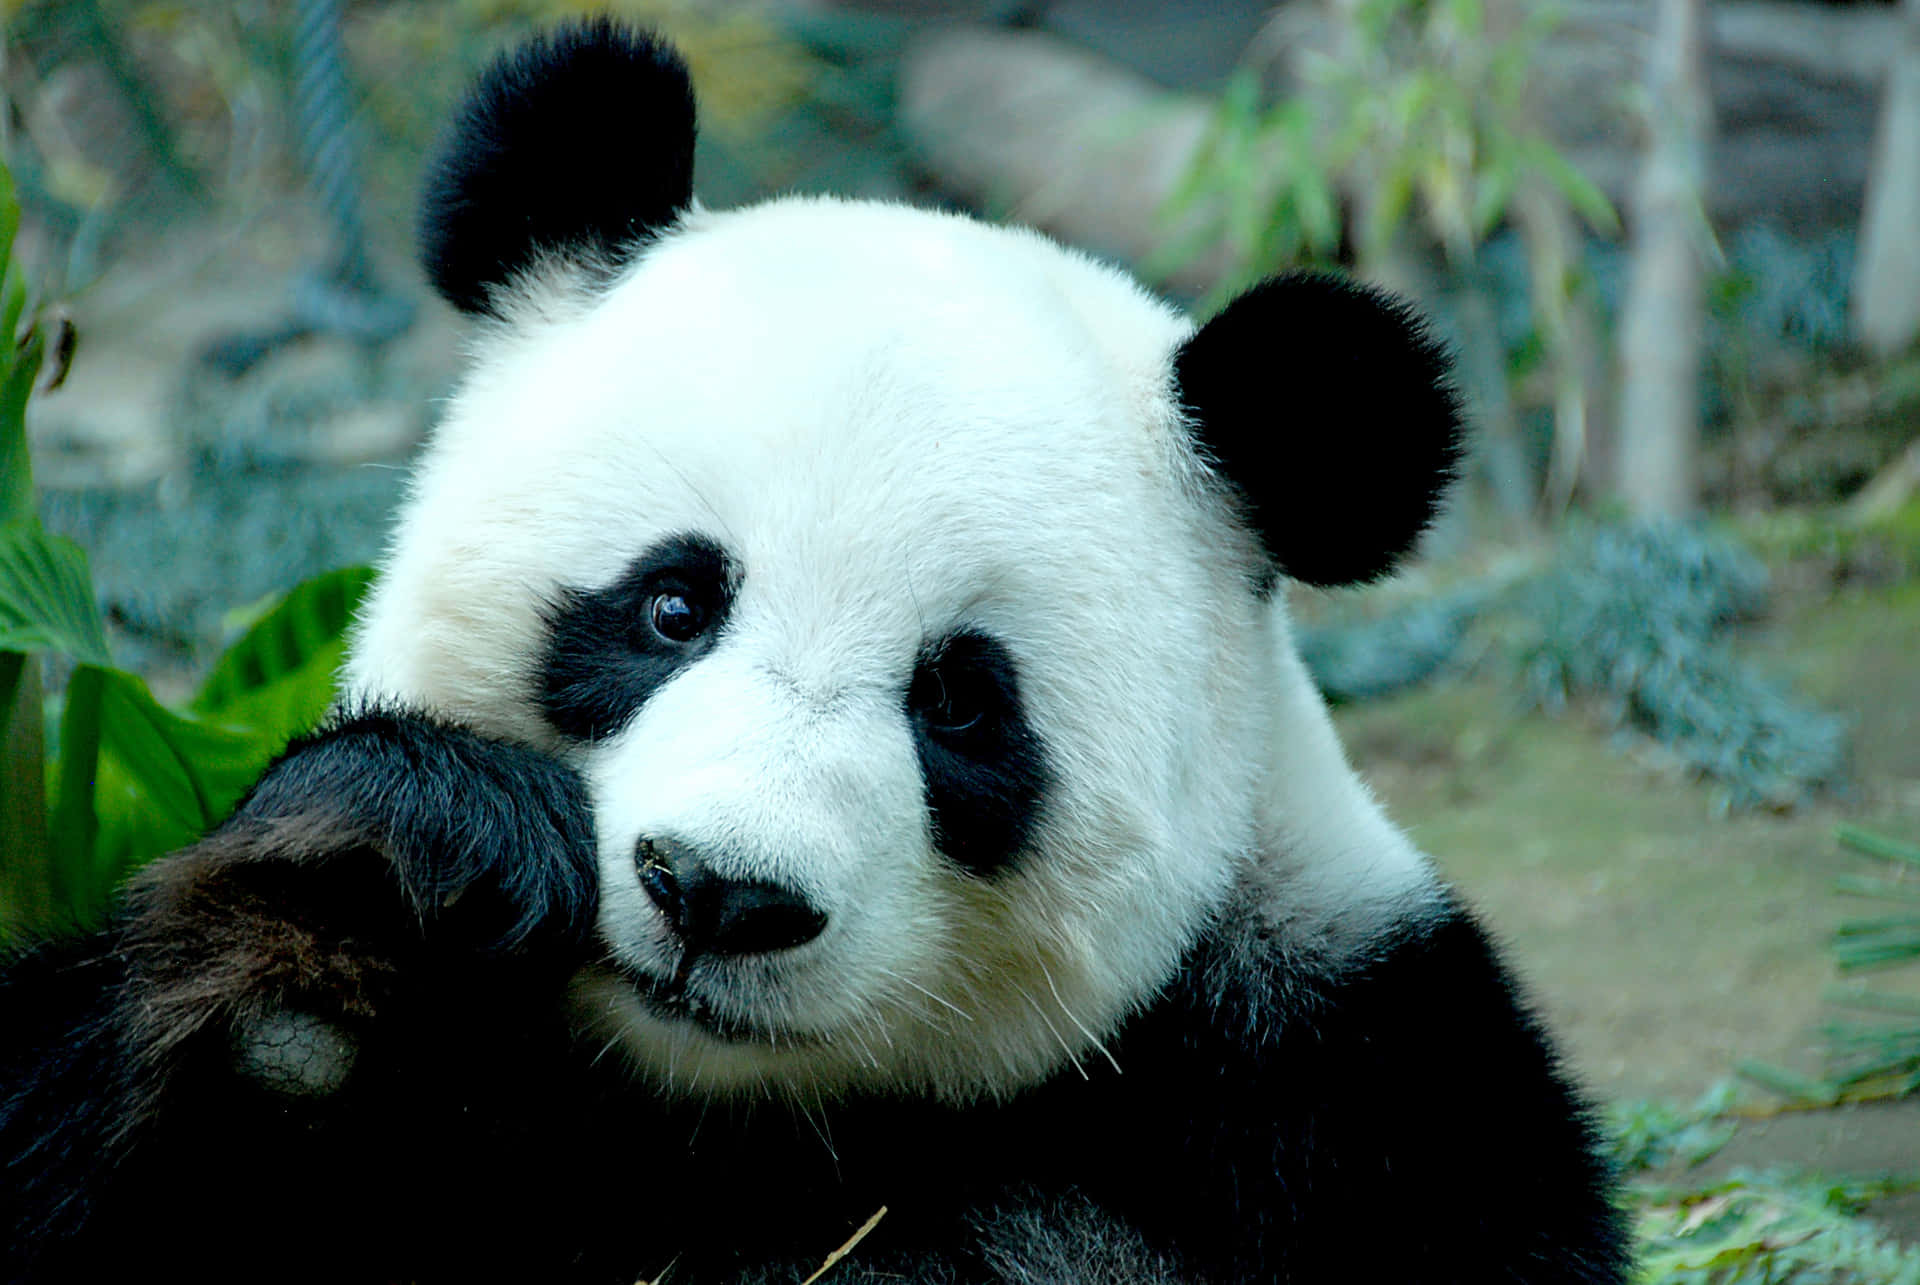 Picture of a cute baby panda hanging out in his natural environment